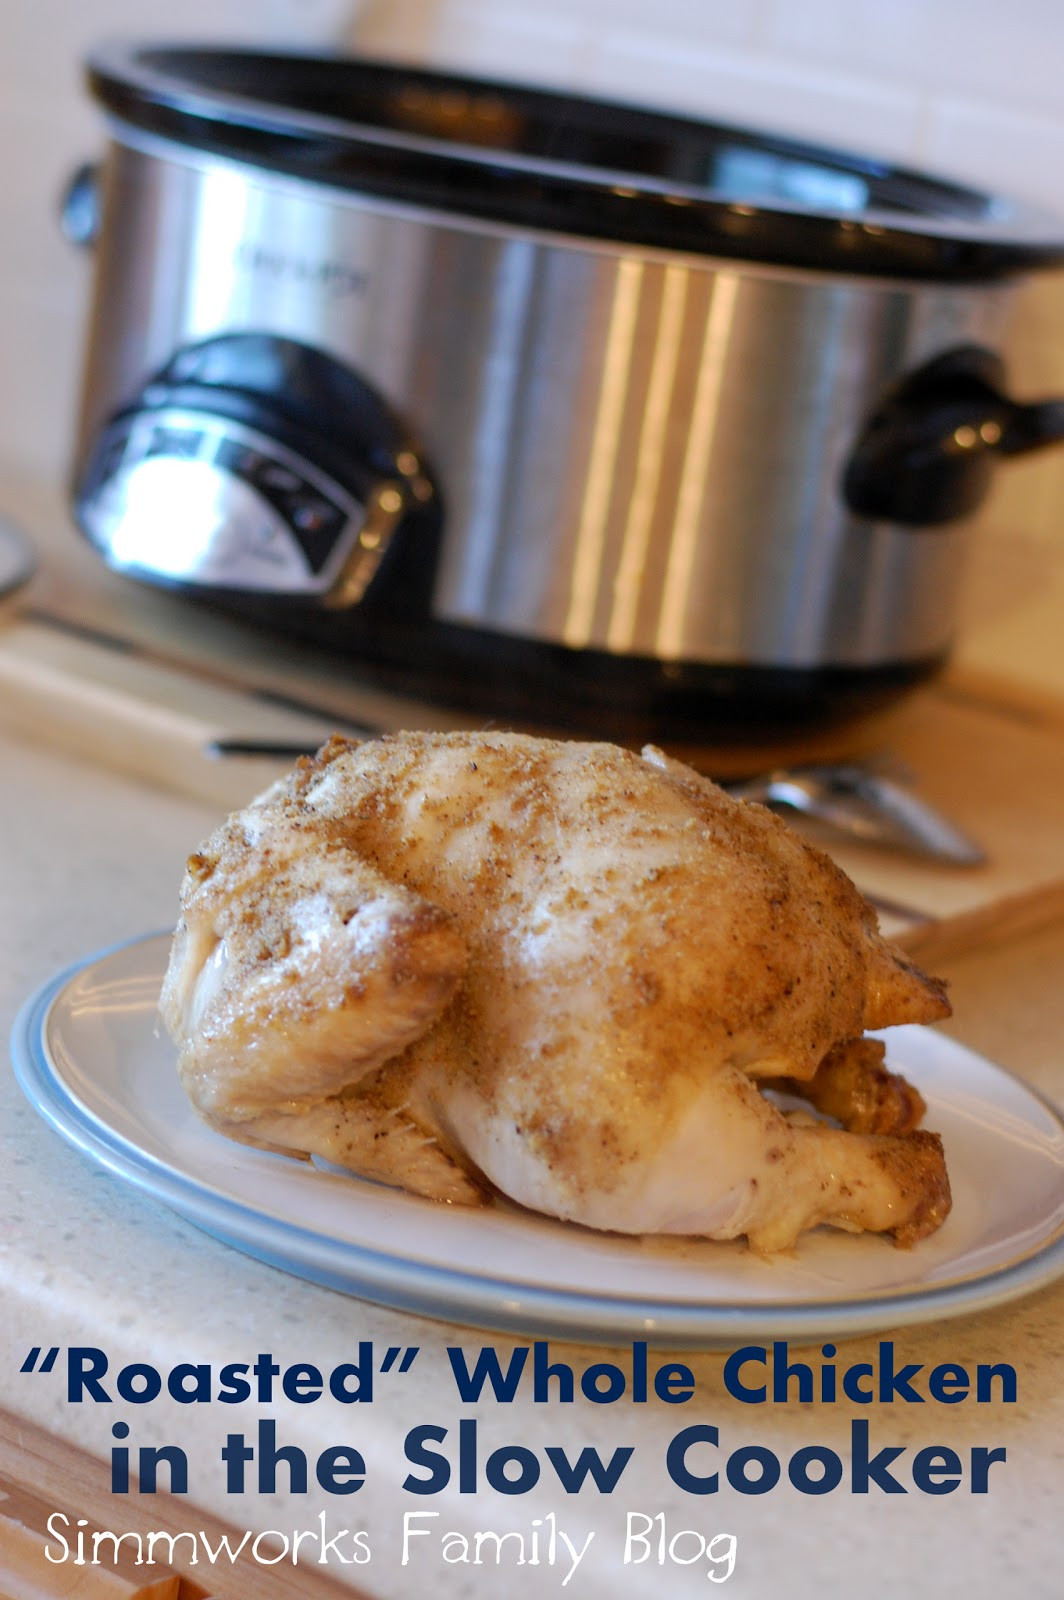 Whole Chicken Slow Cooker Recipe
 "Roasted" Whole Chicken Slow Cooker Dinner Recipe A